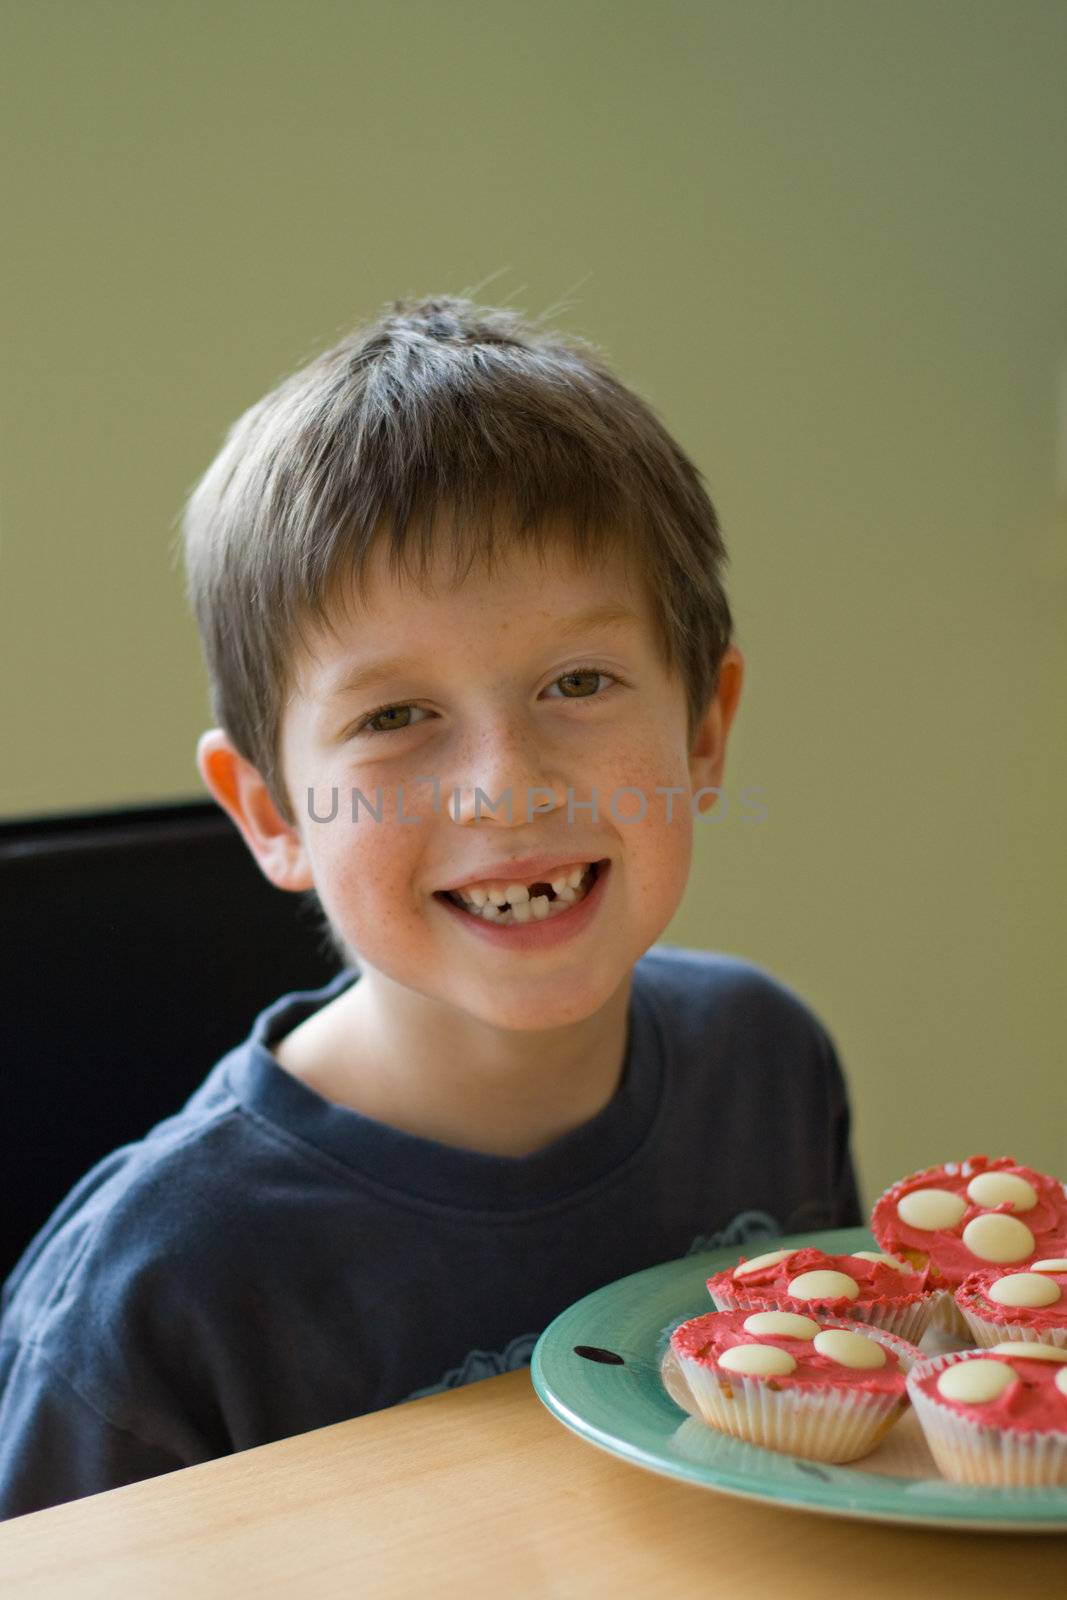 Boy with gap-tooth smile and cupcakes